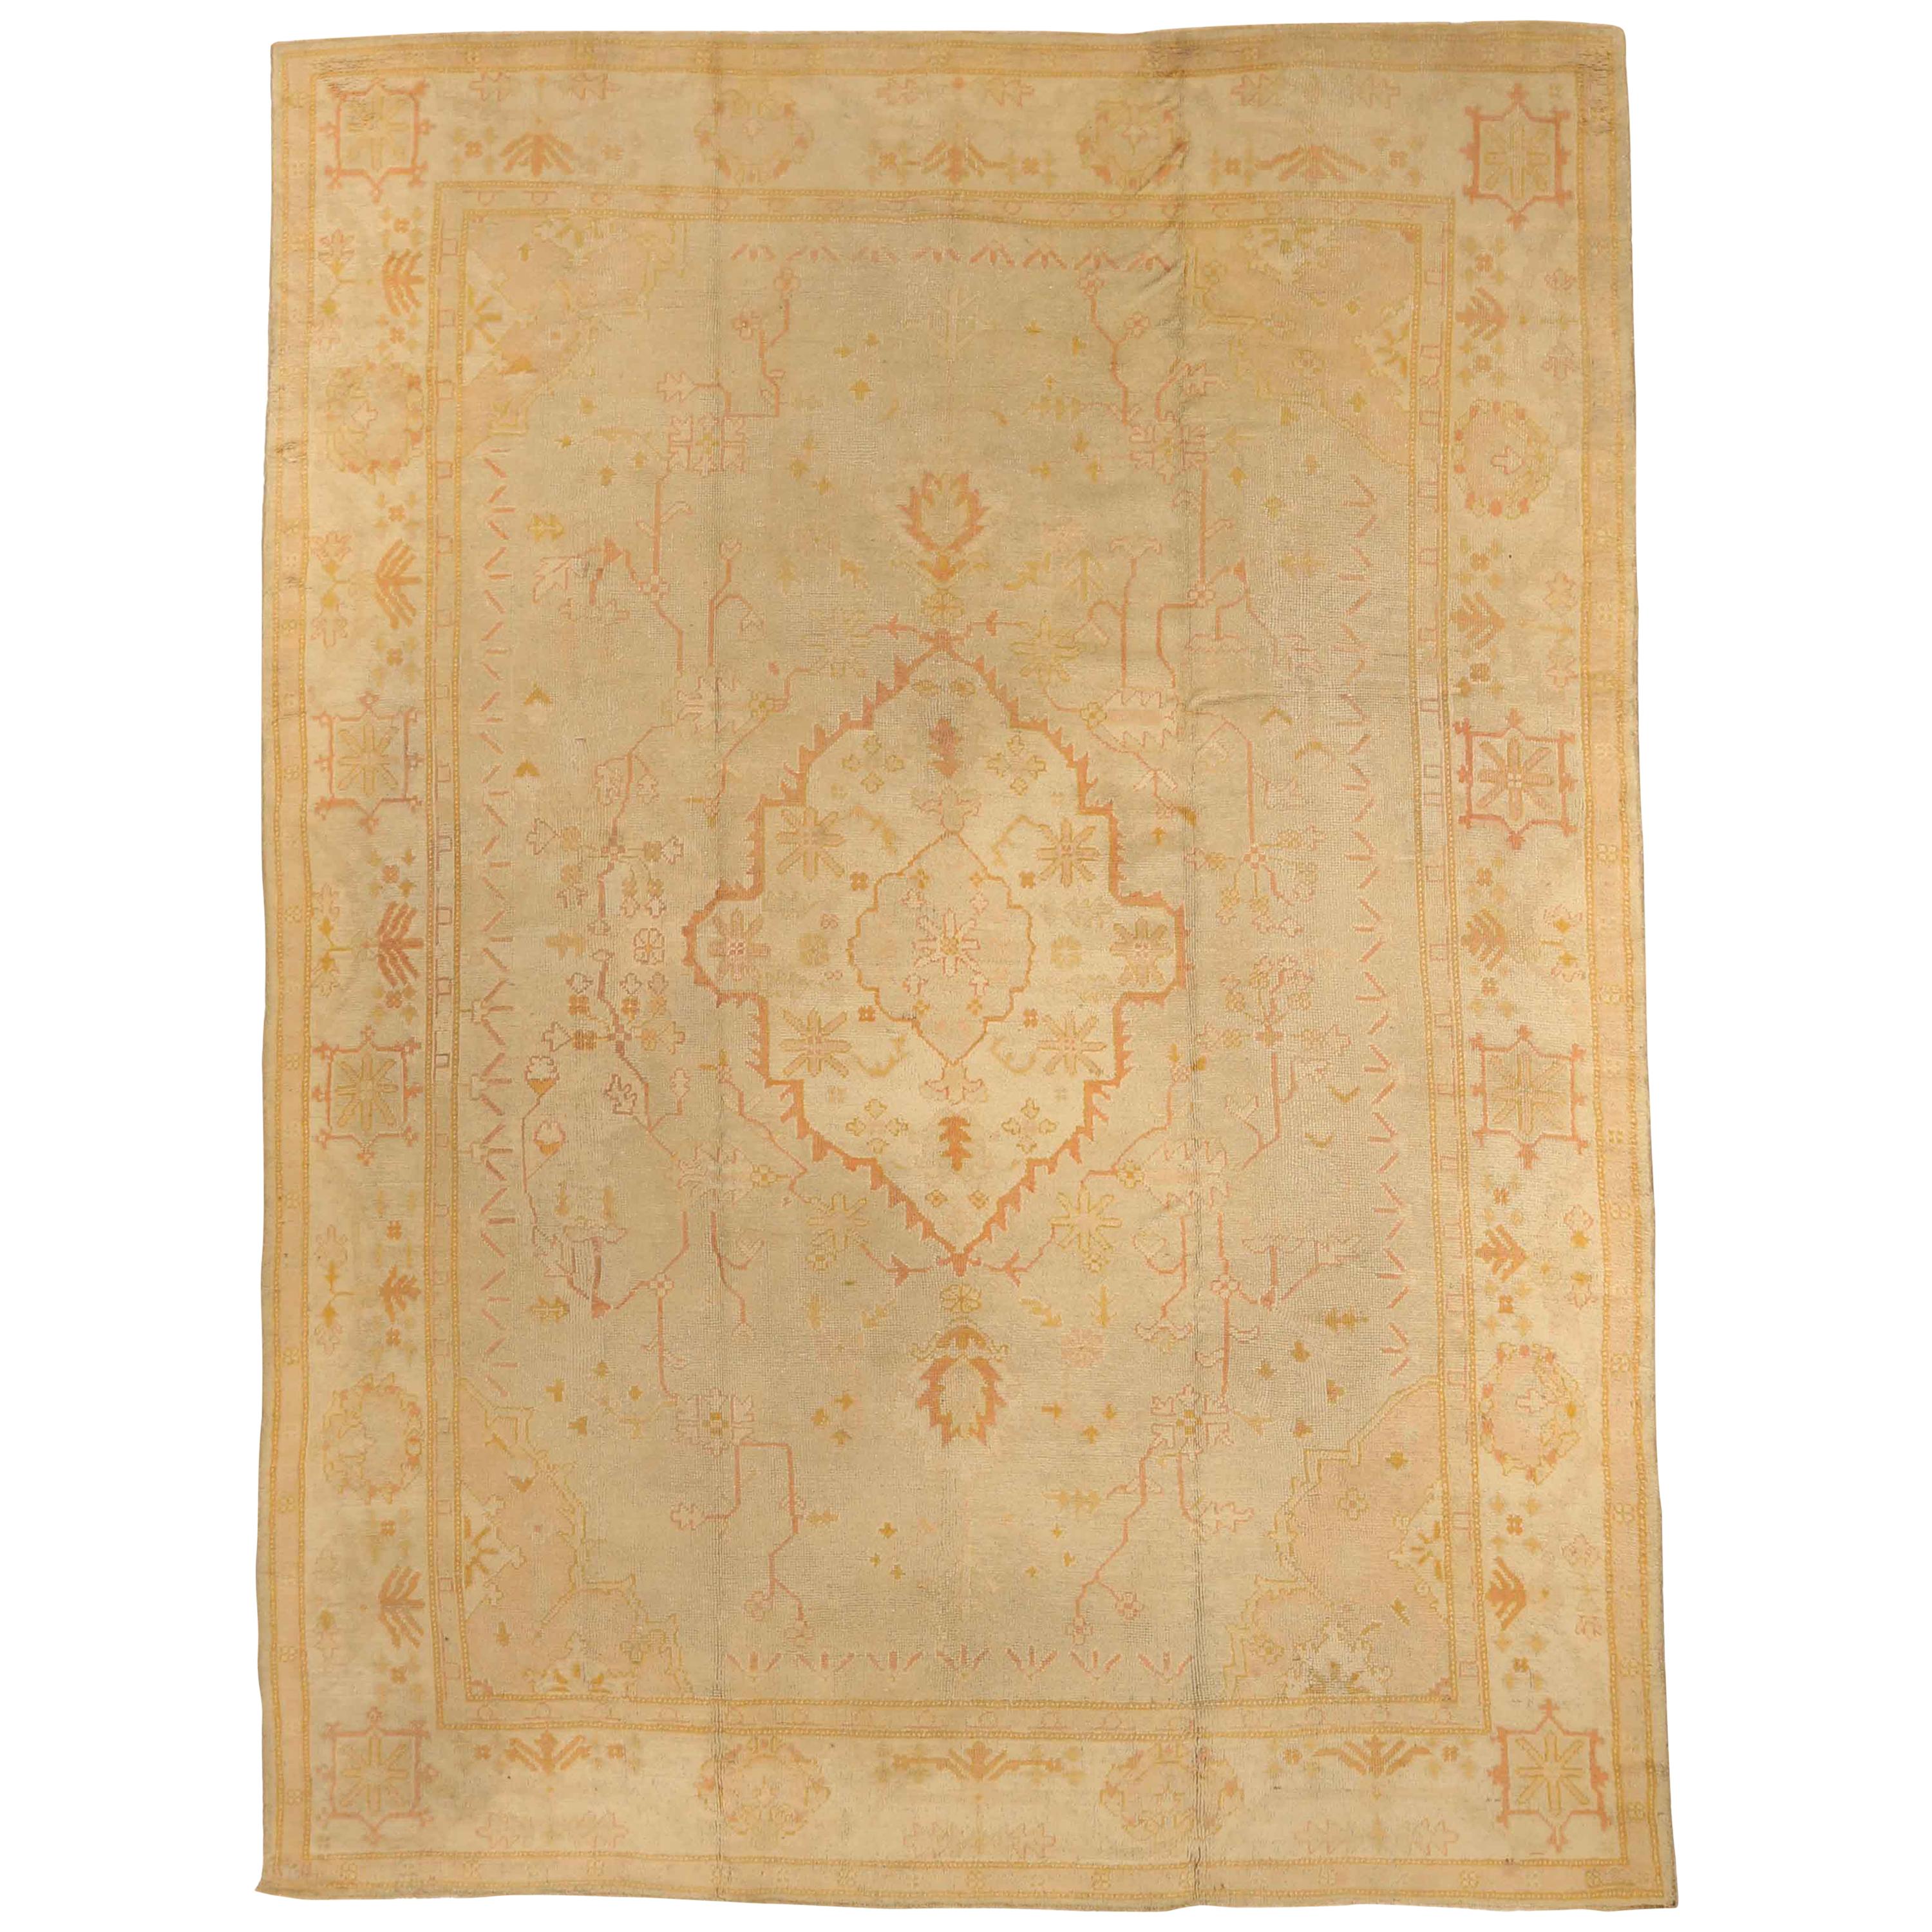 1910s Antique Persian Oushak Rug with Ivory and Beige Flower Field Design